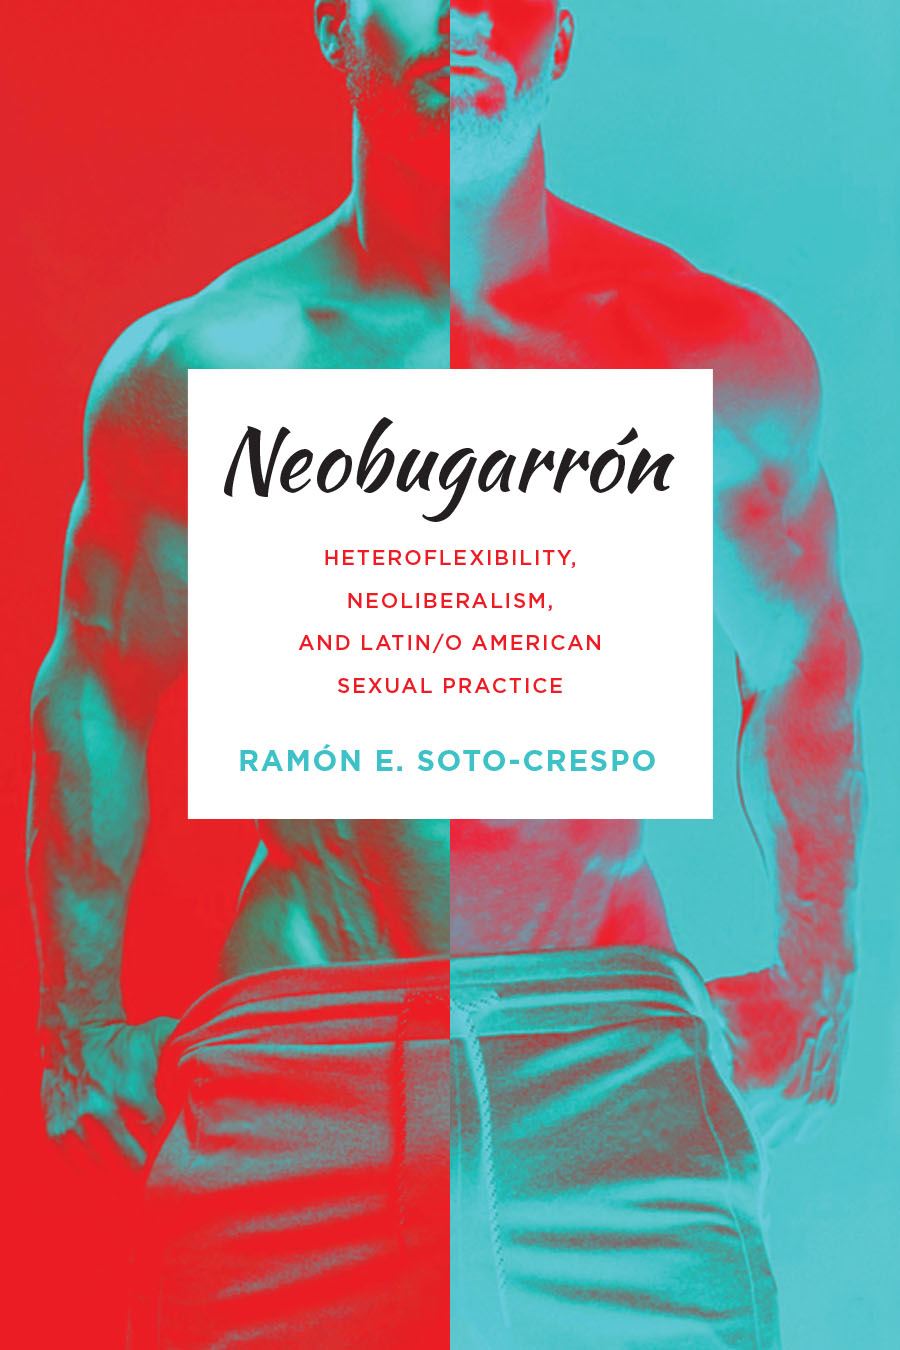 Front cover of Neobugarrón: Heteroflexibility, Neoliberalism, and Latin/o American Sexual Practice by Ramón E. Soto-Crespo, featuring a stylized and suggestive shirtless man's torso highlighted in bright red and teal. 